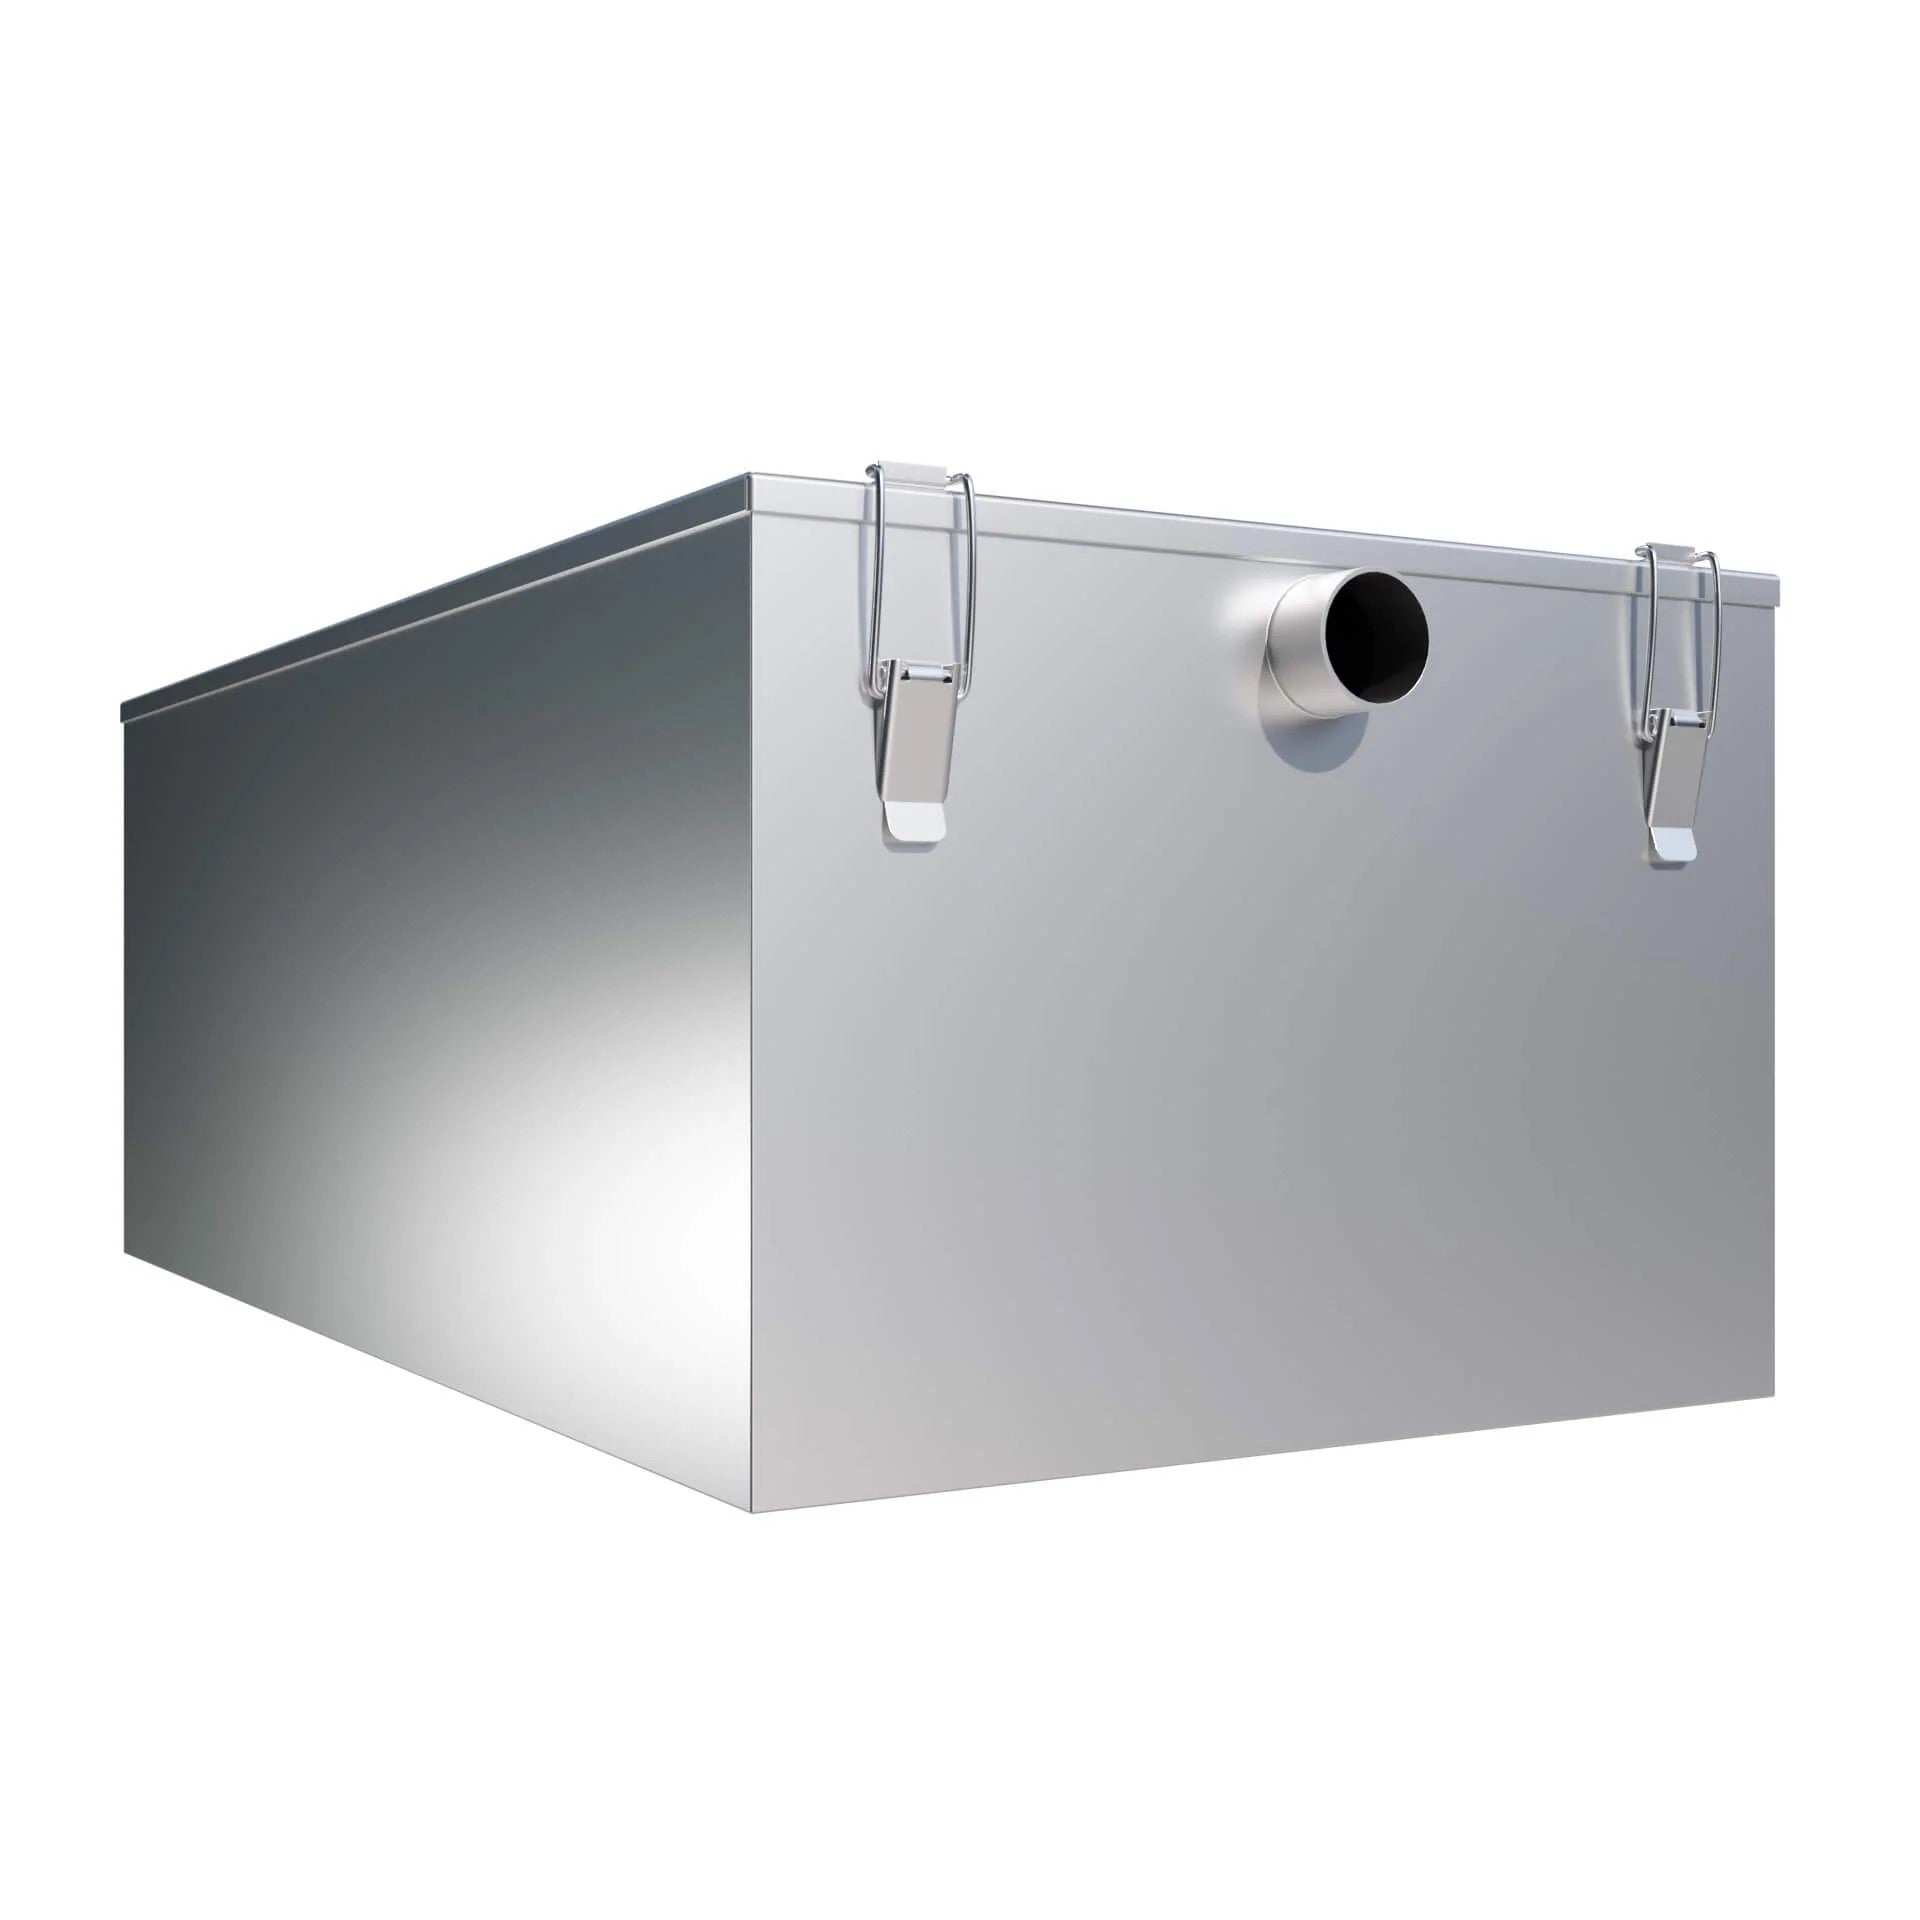 Davlex Stainless Steel Grease Trap 119 Litre Capacity